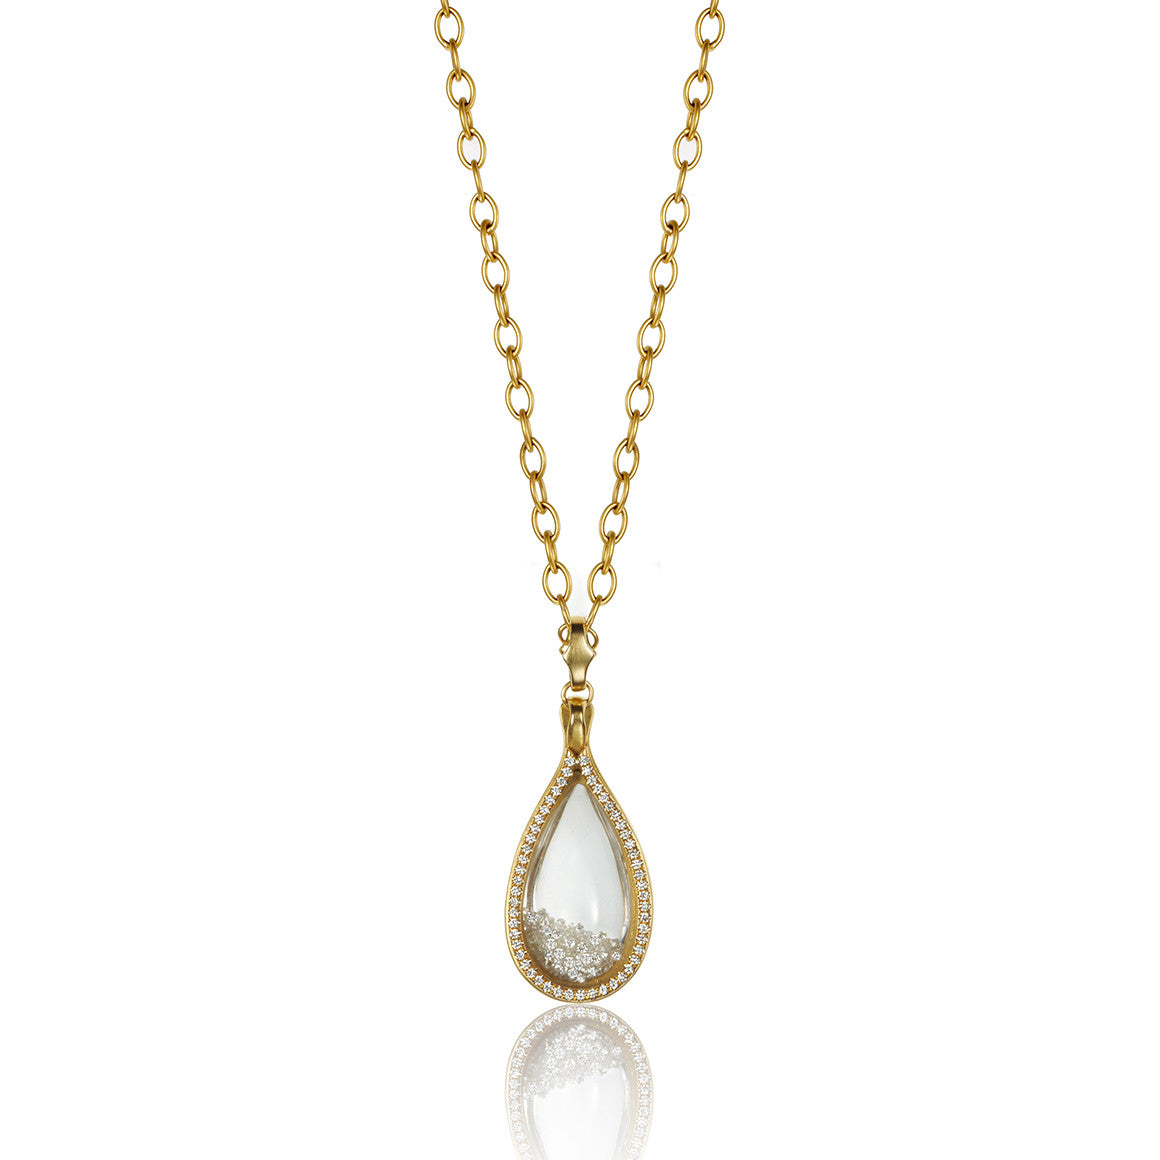 Tearcup Amulet with White Diamonds featuring Pavé Back